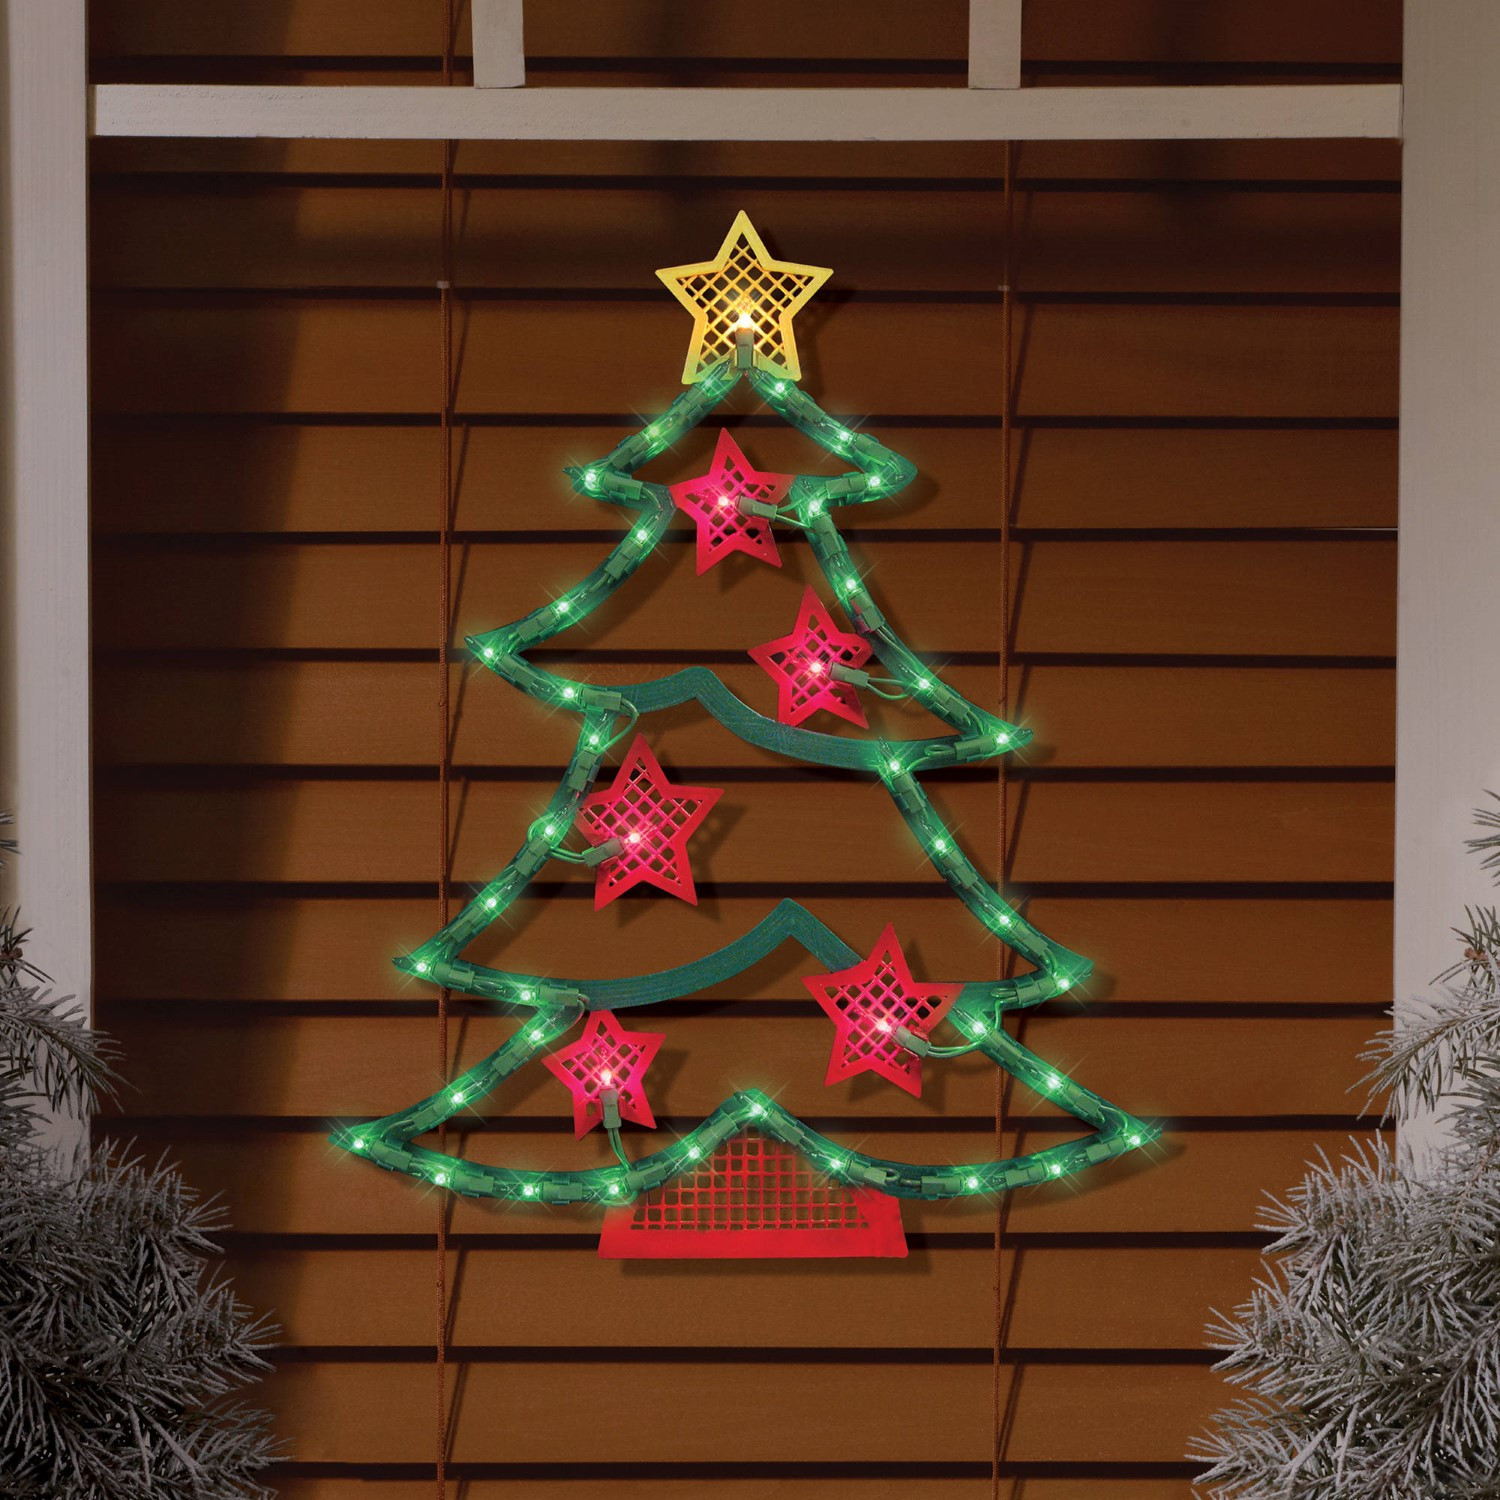 Lighted Christmas Window Decorations Indoor
 Impact Innovation Import DISC Christmas Window